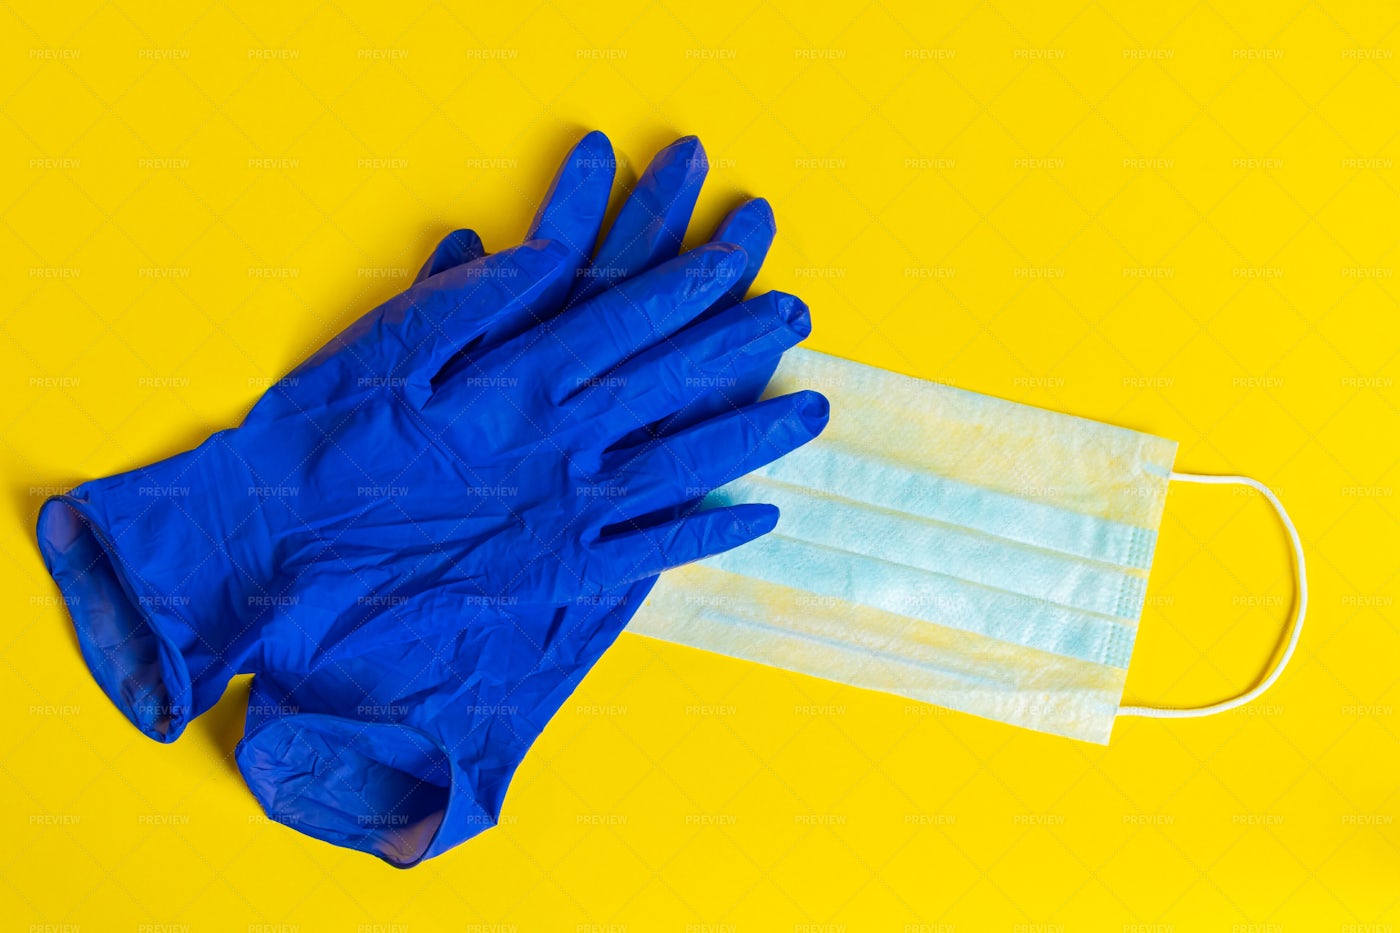 Latex Gloves And Mask: Stock Photos